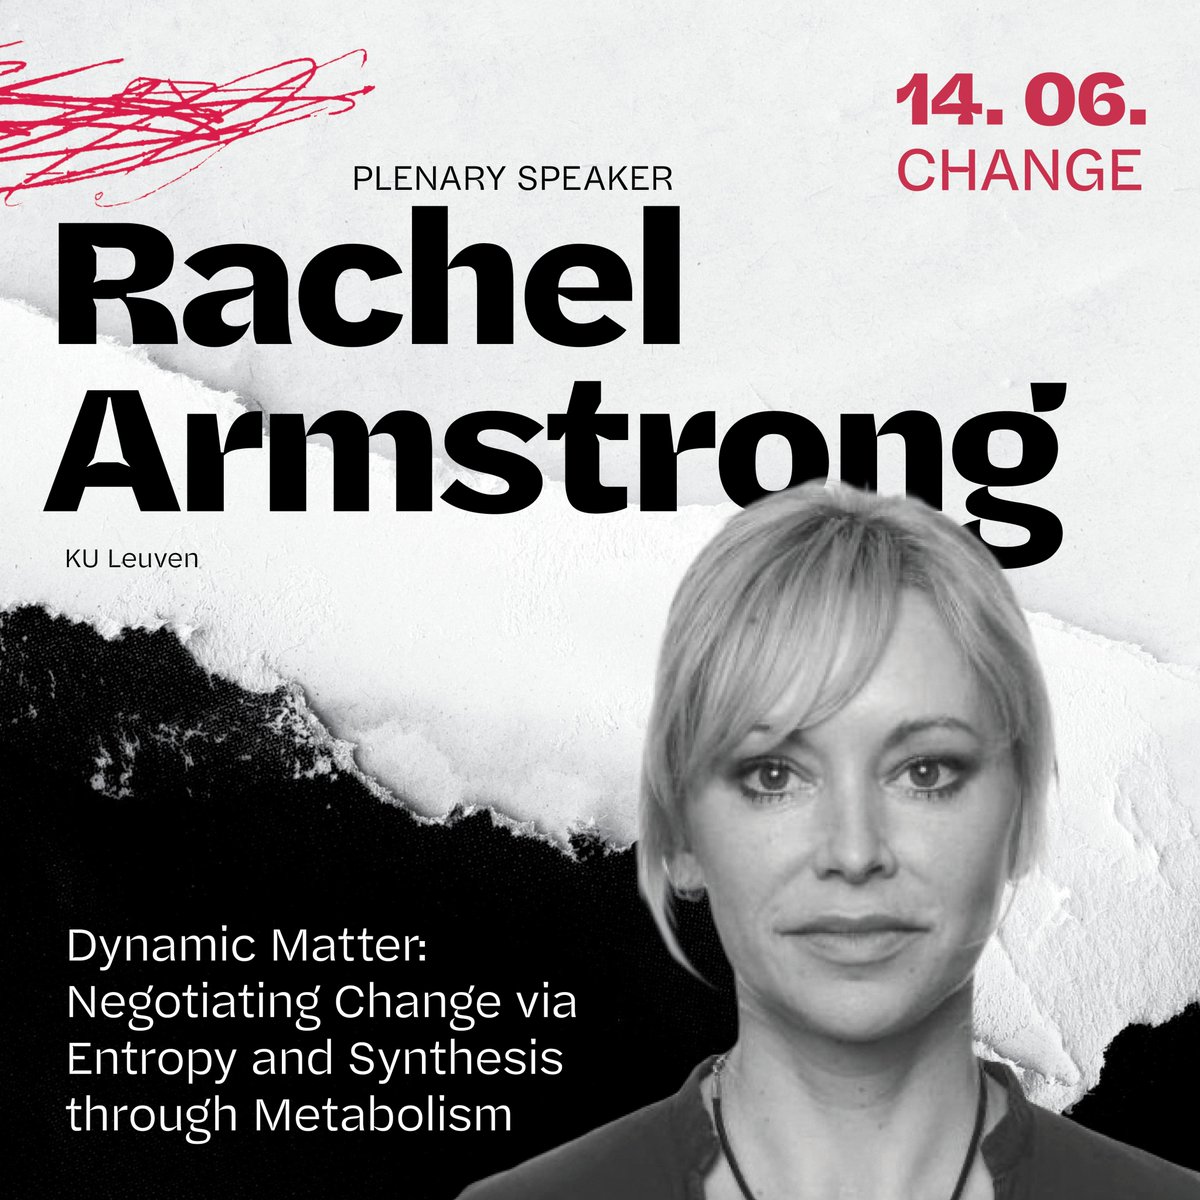 Rachel Armstrong (@livingarchitect) of @KU_Leuven integrates living systems science with sustainable materials for regenerative architecture. Join us on June 14th at 11:00 CET in Room 2 at the Rectorate for the International Conference CHANGE panel 'Dynamic Matter: Negotiating